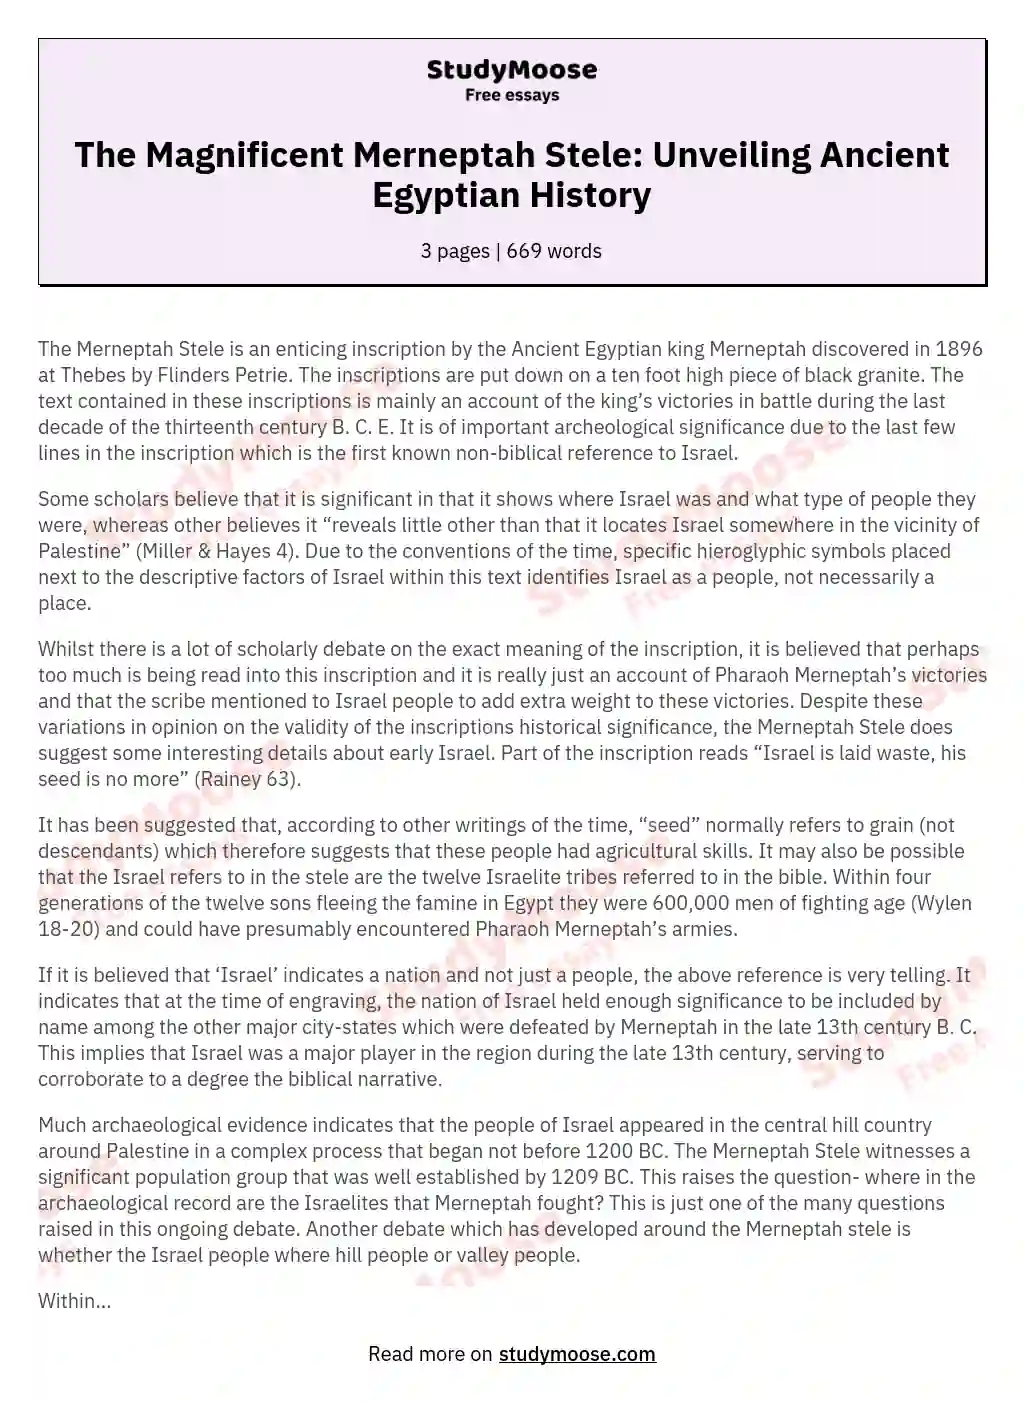 The Magnificent Merneptah Stele: Unveiling Ancient Egyptian History essay